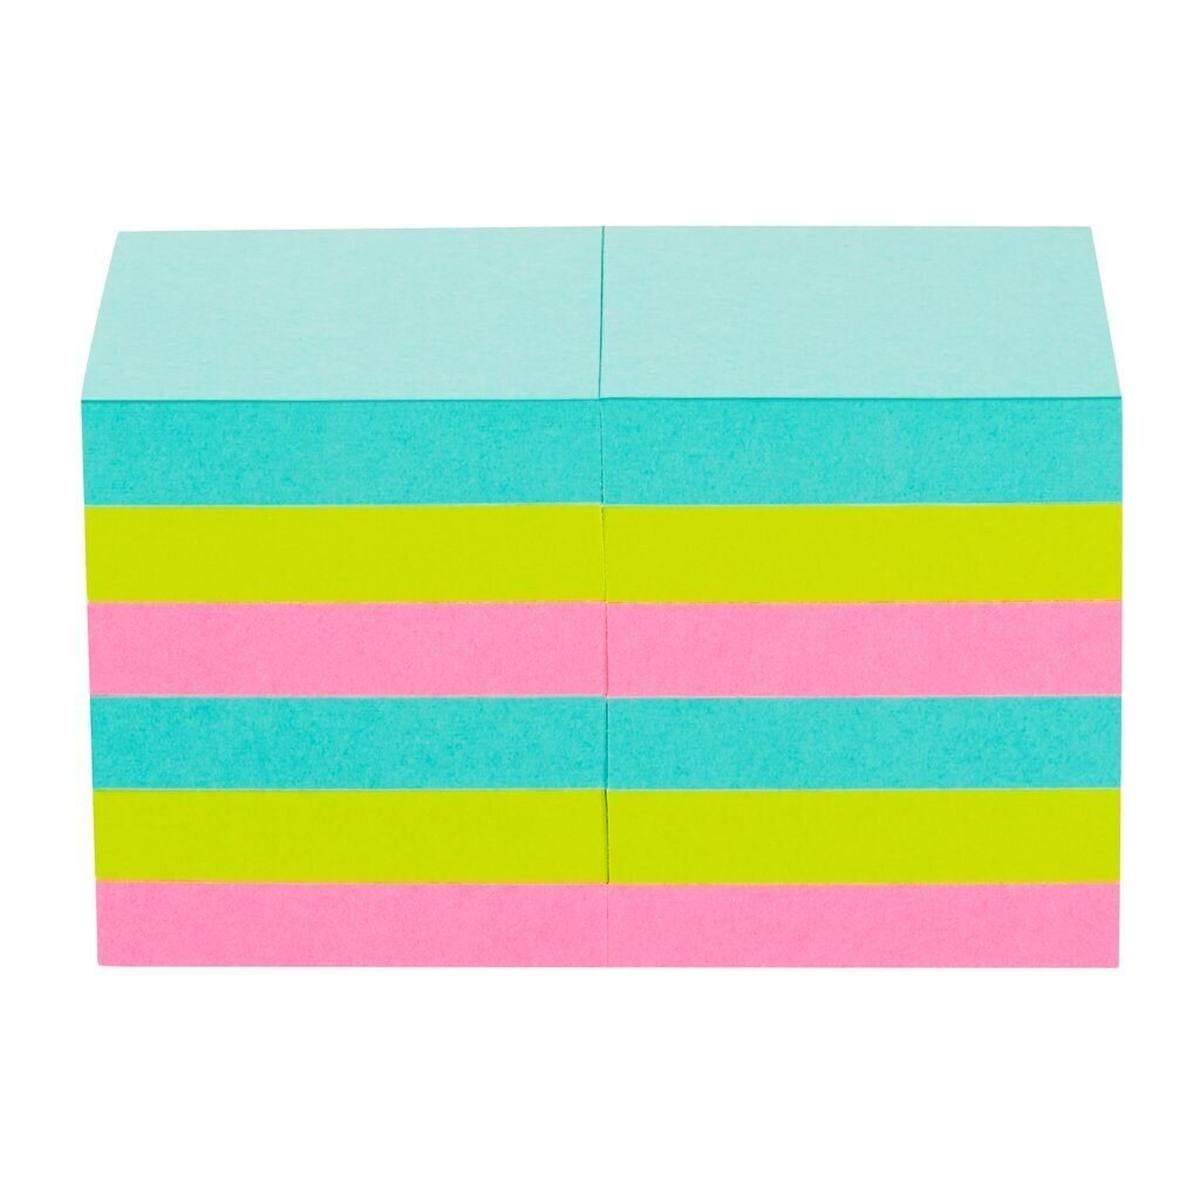 3M Post-it Super Sticky Notes 62212SMI, 48 mm x 48 mm, turquoise, neon green, neon pink, 12 pads of 90 sheets each